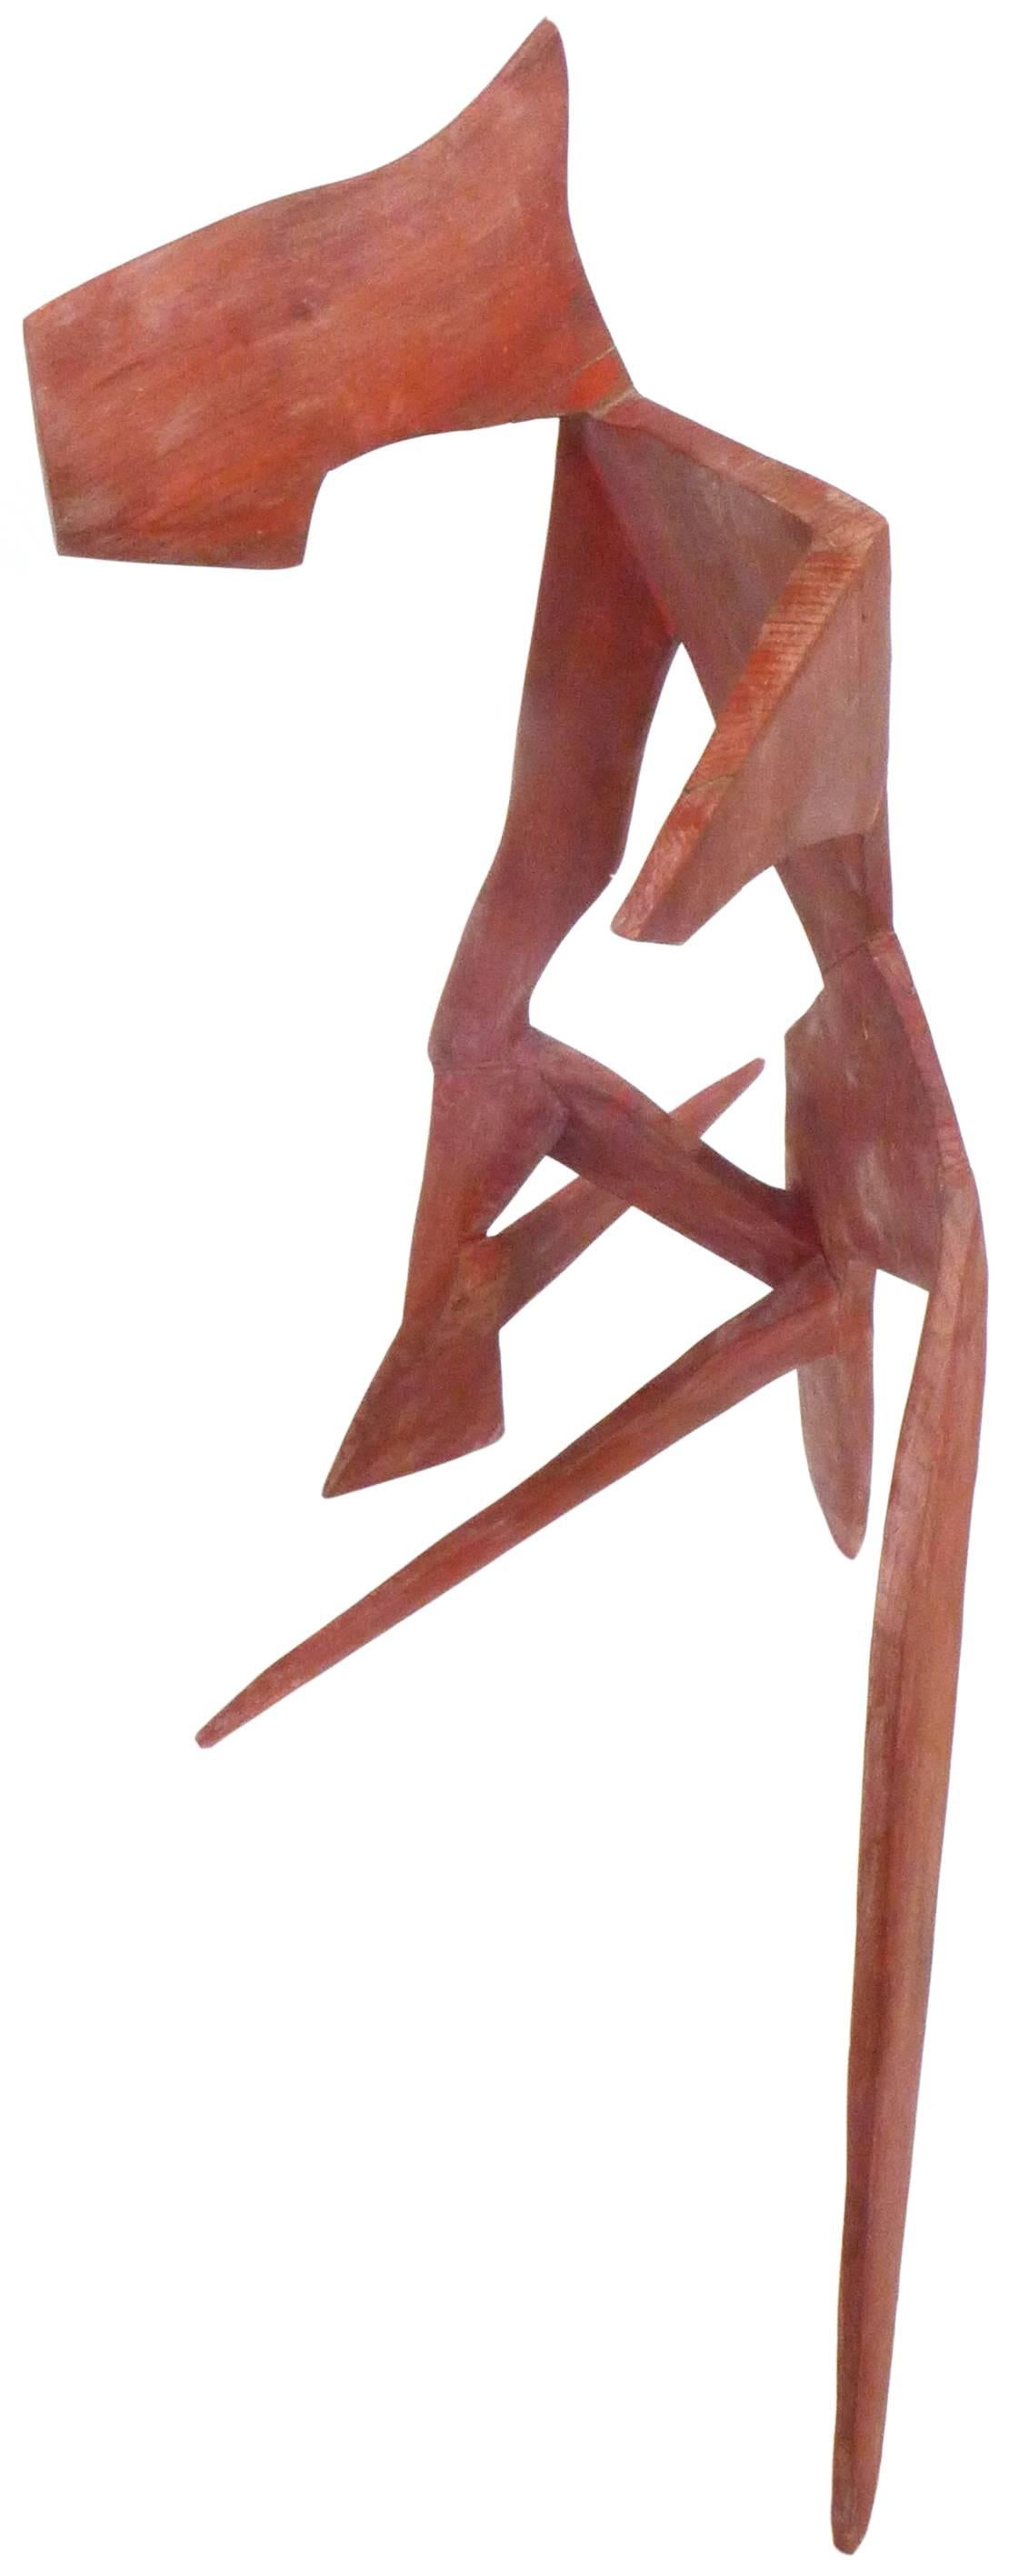 Painted Modernist Abstract Wood Sculpture